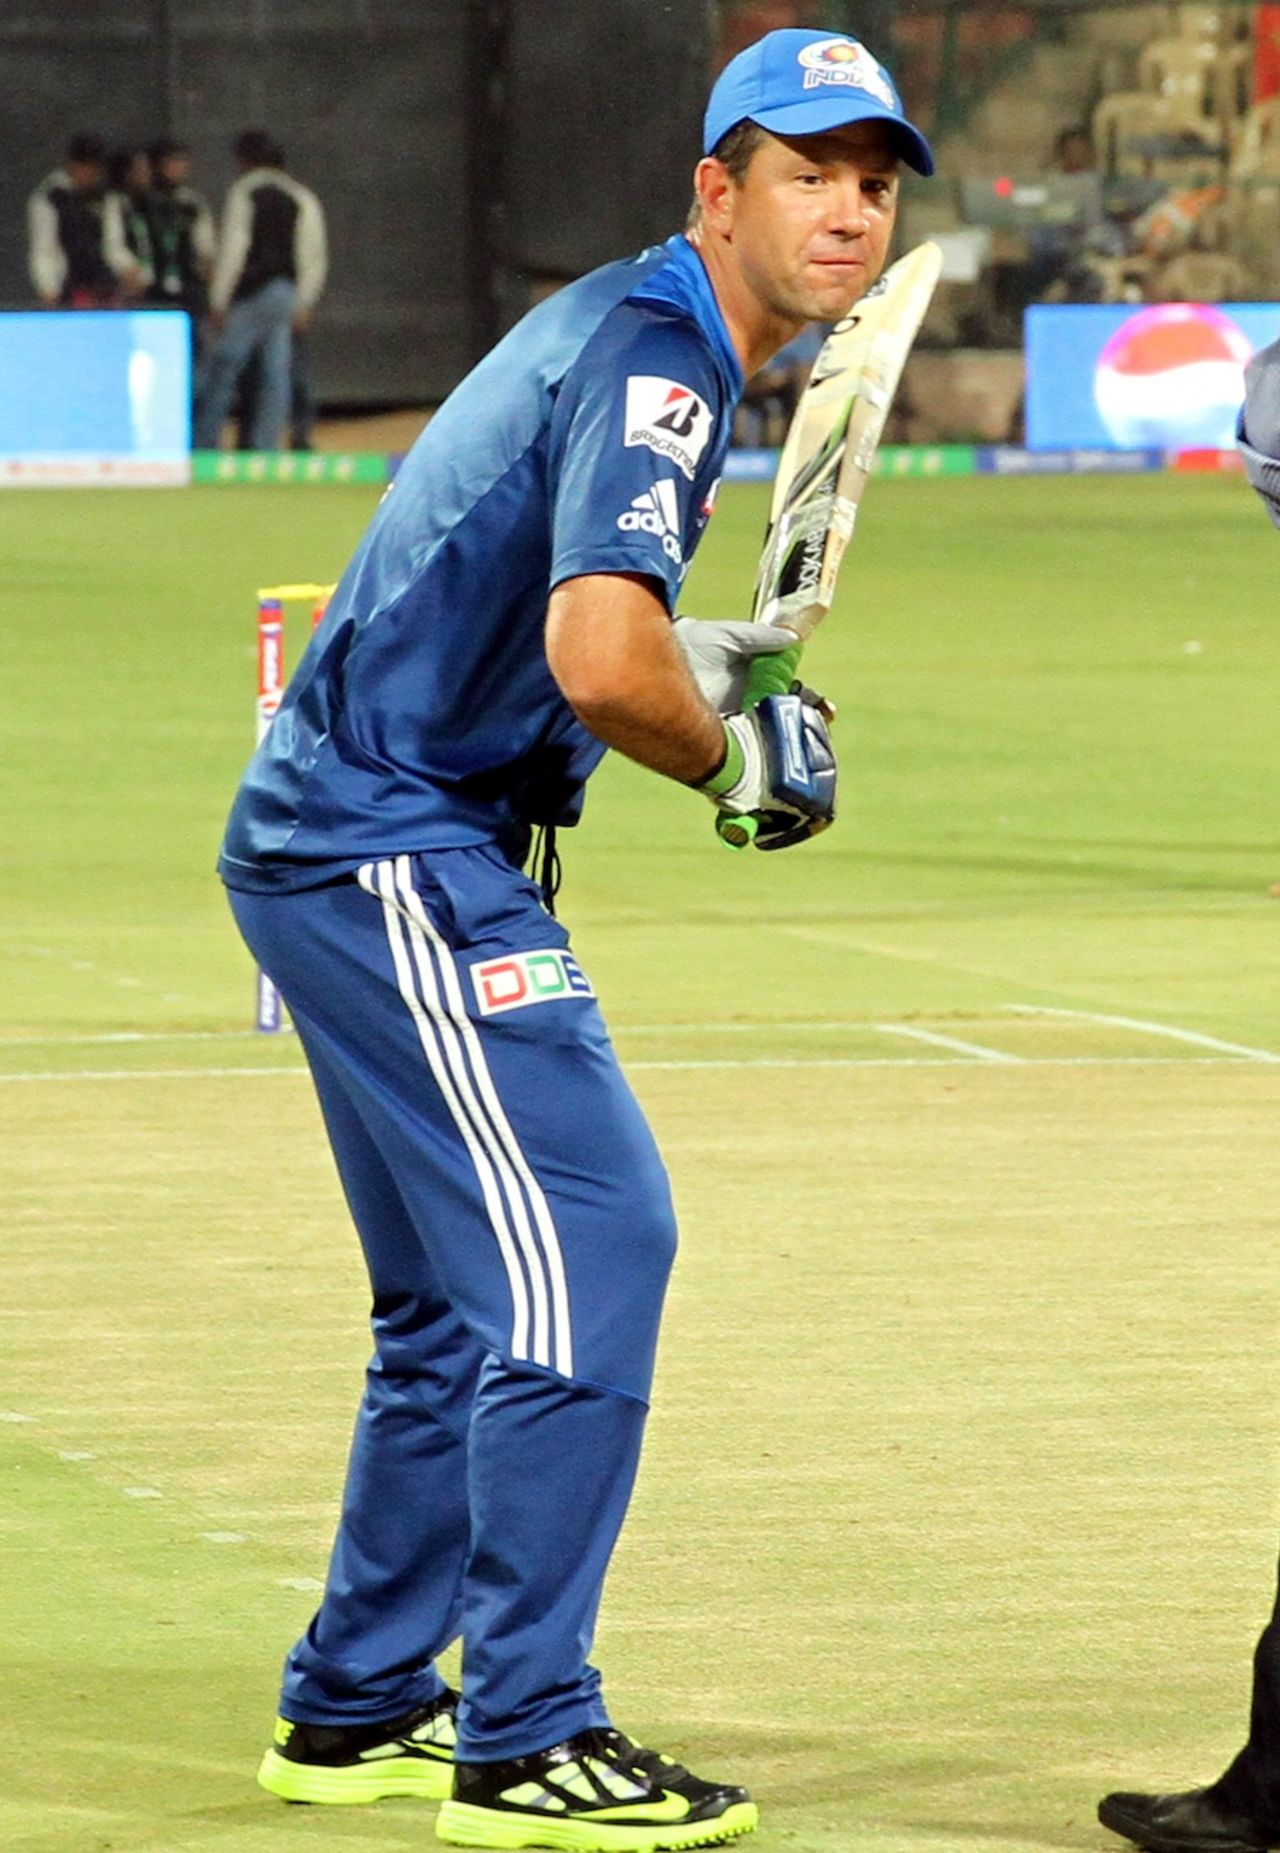 New role: Ricky Ponting poses left-handed before the start of the match, Royal Challengers Bangalore v Mumbai Indians, IPL, Bangalore, April 4, 2013